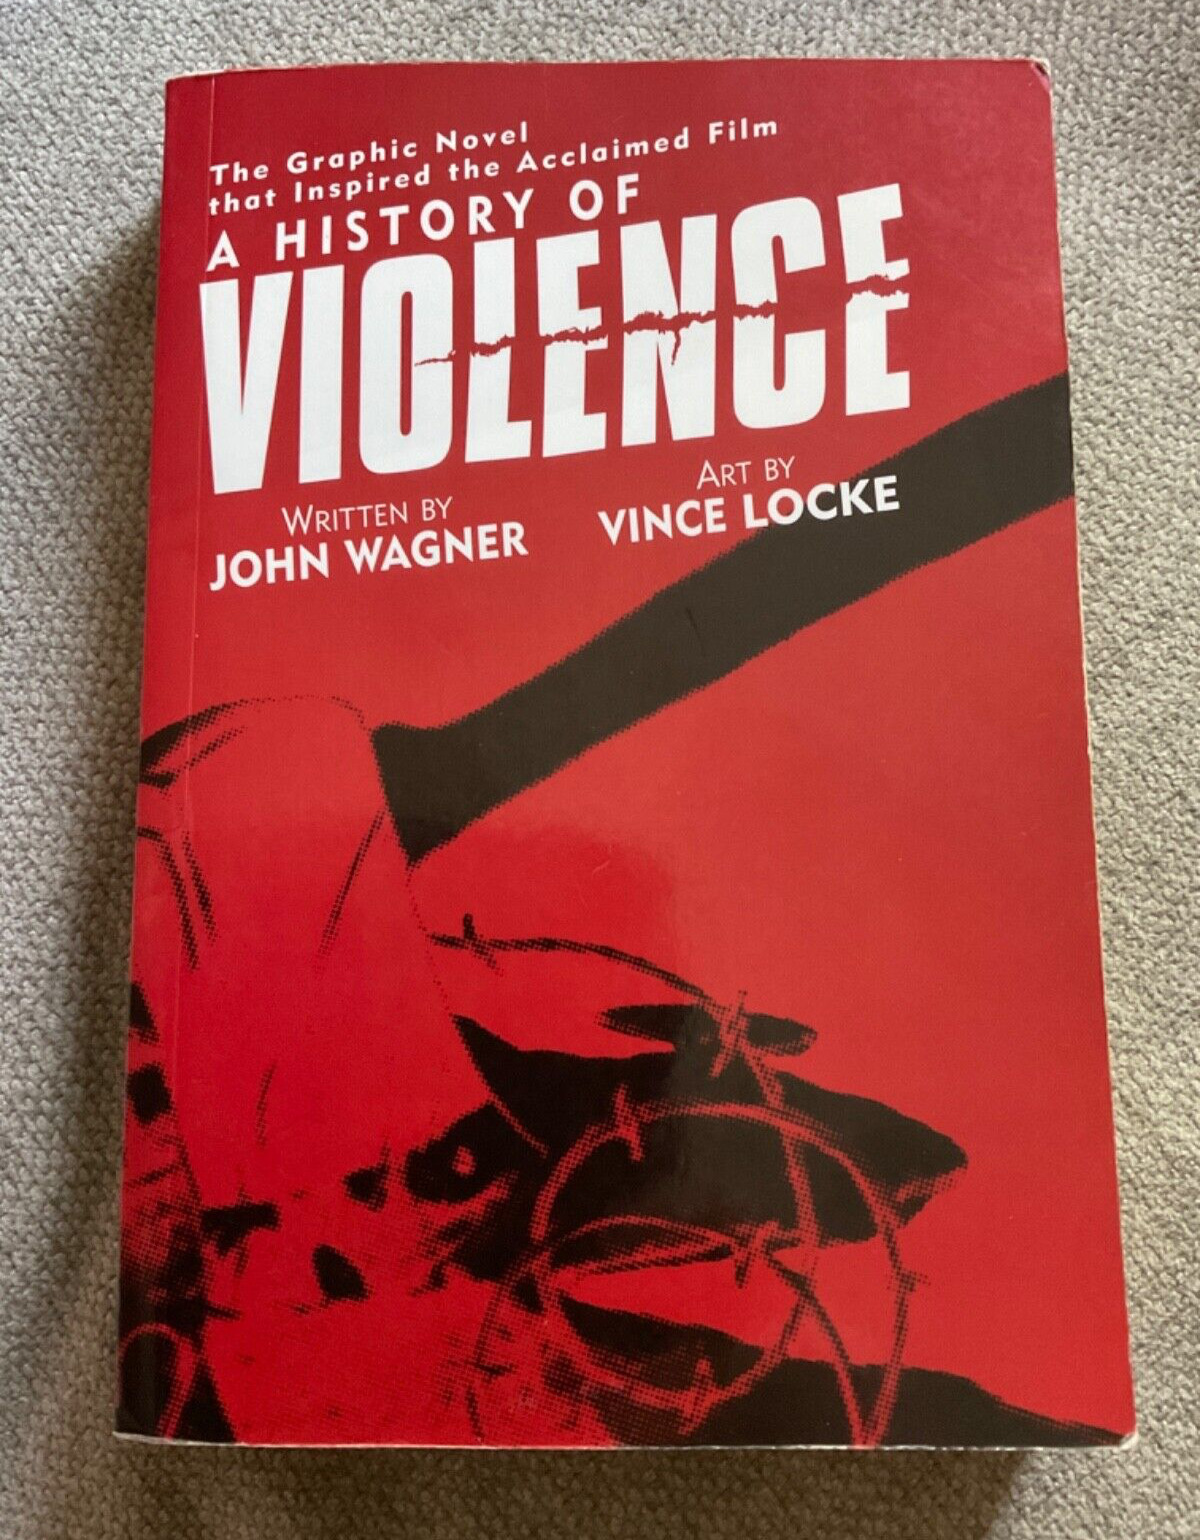 A History of Violence By John Wagner Graphic Novel 9781563893674 4th printing